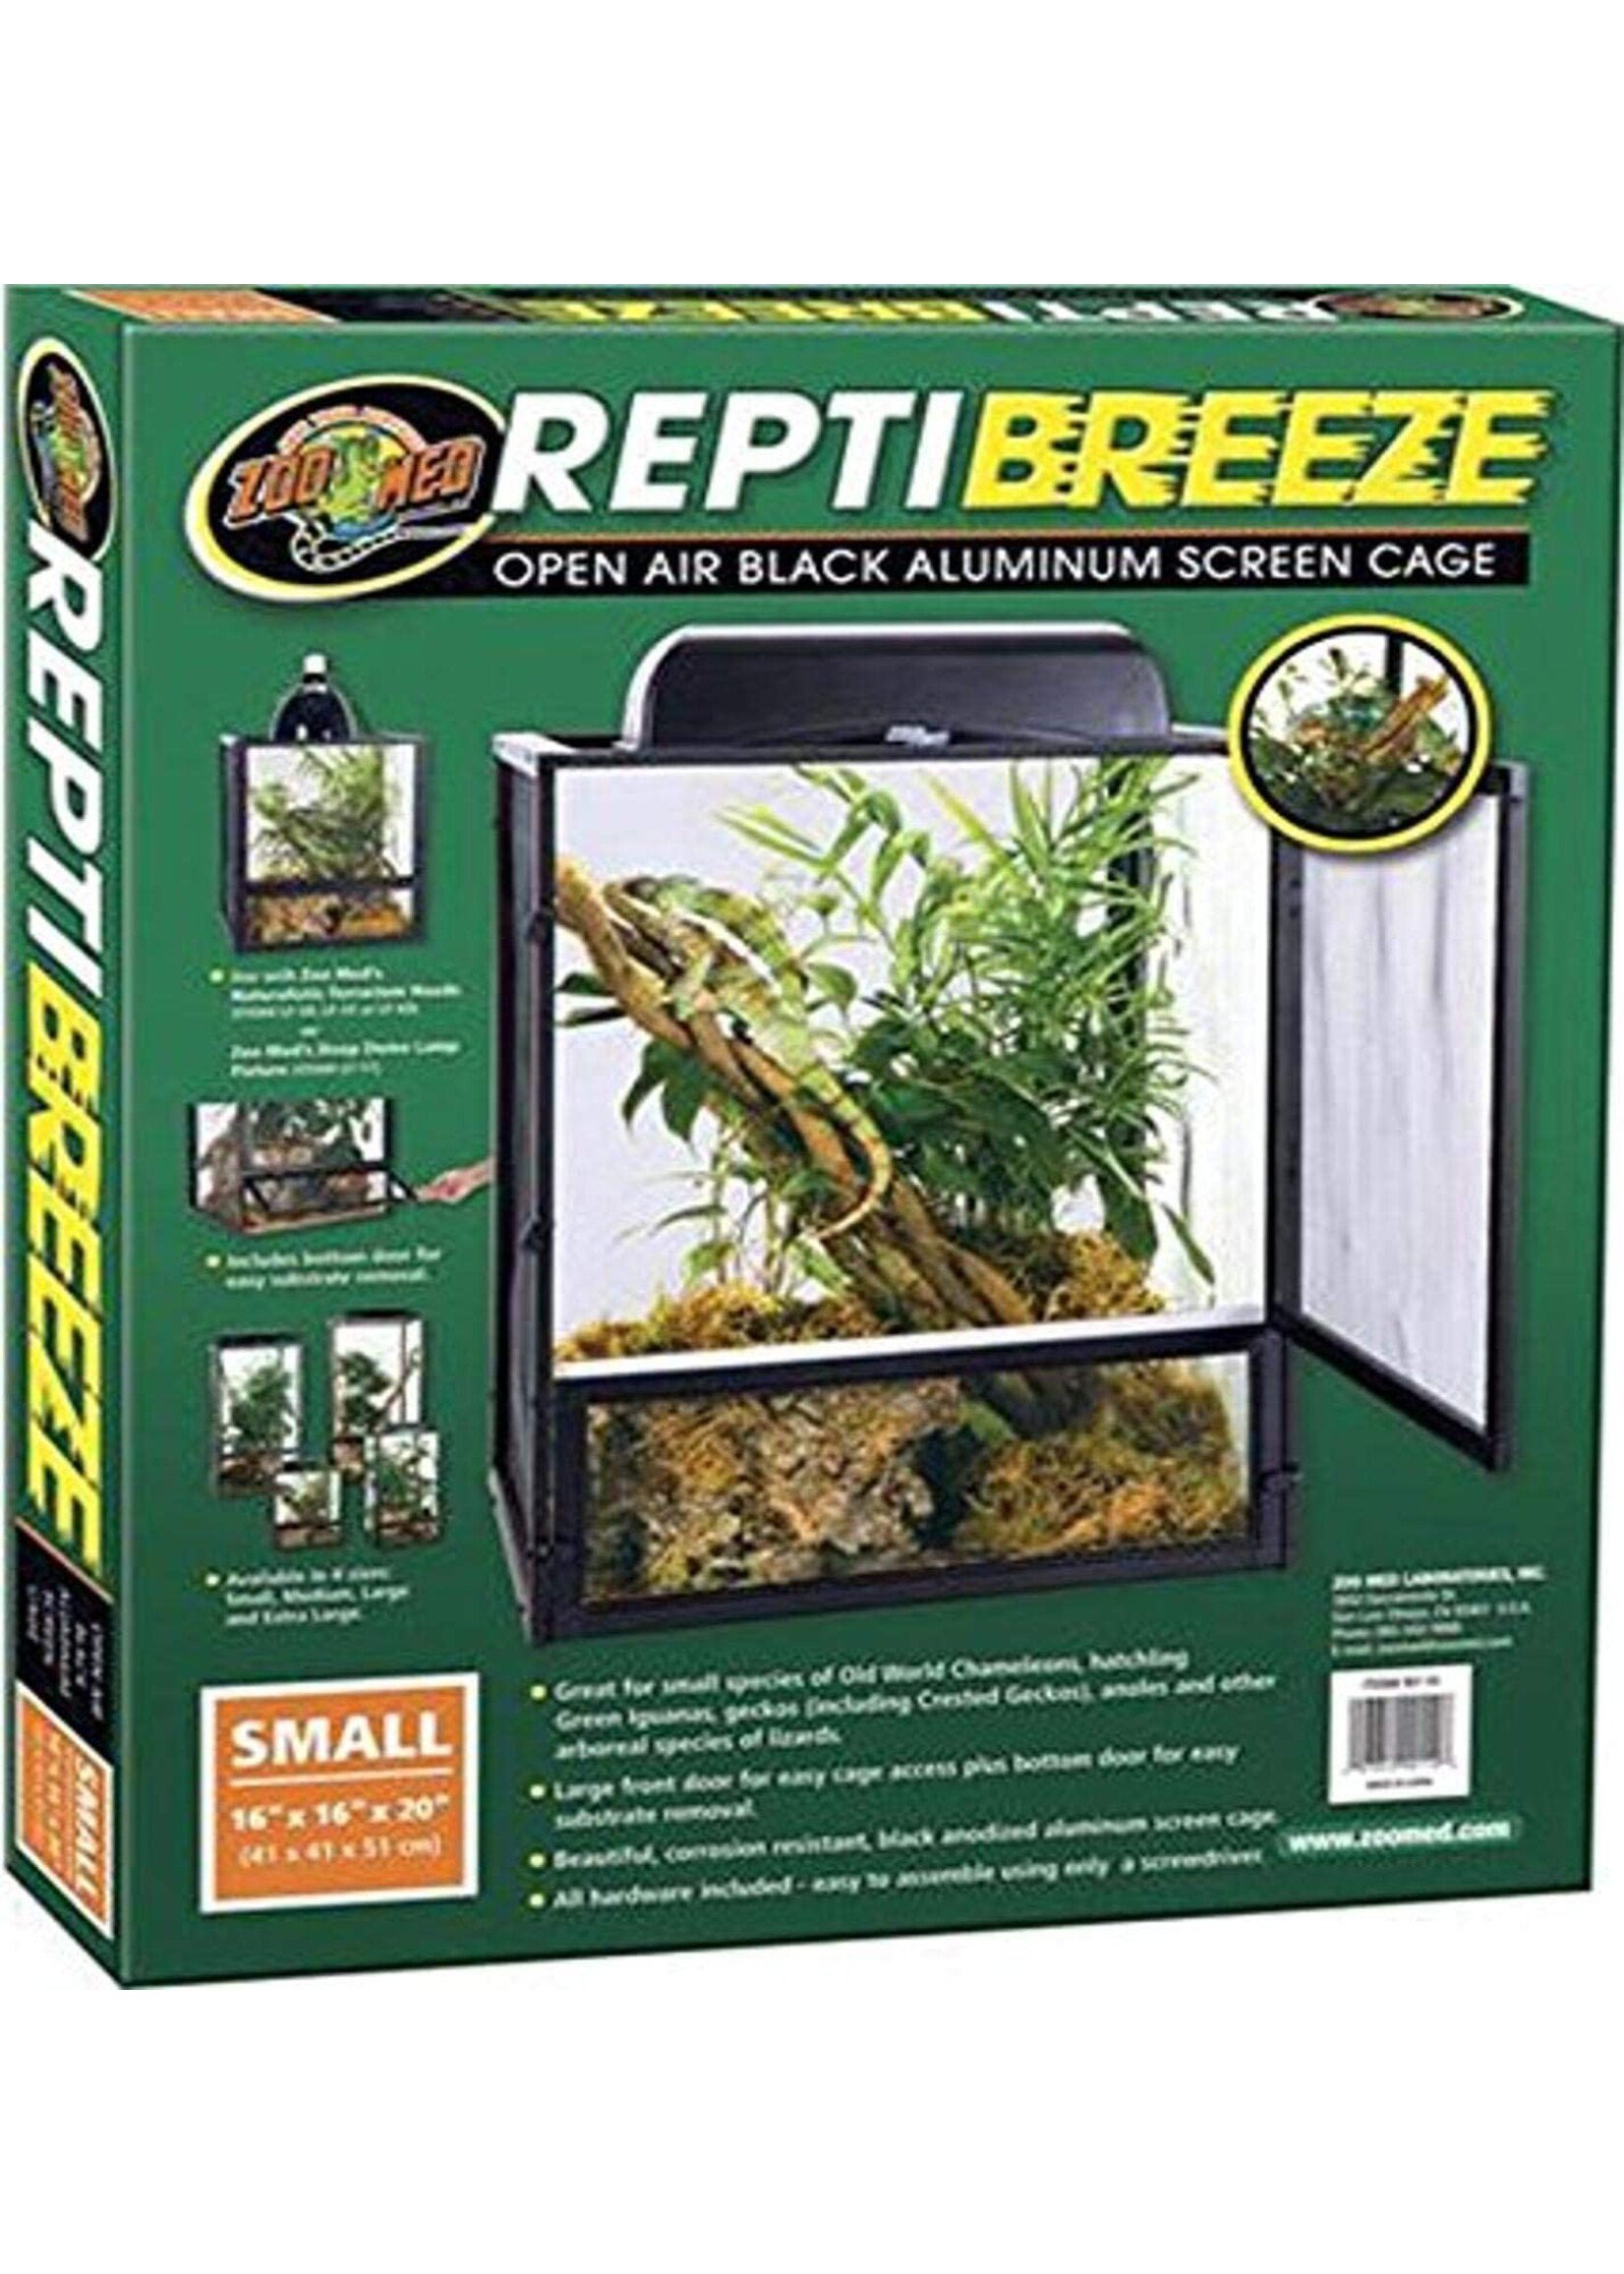 Zoo Med Zoo Med ReptiBreeze Open Air Screen Cage